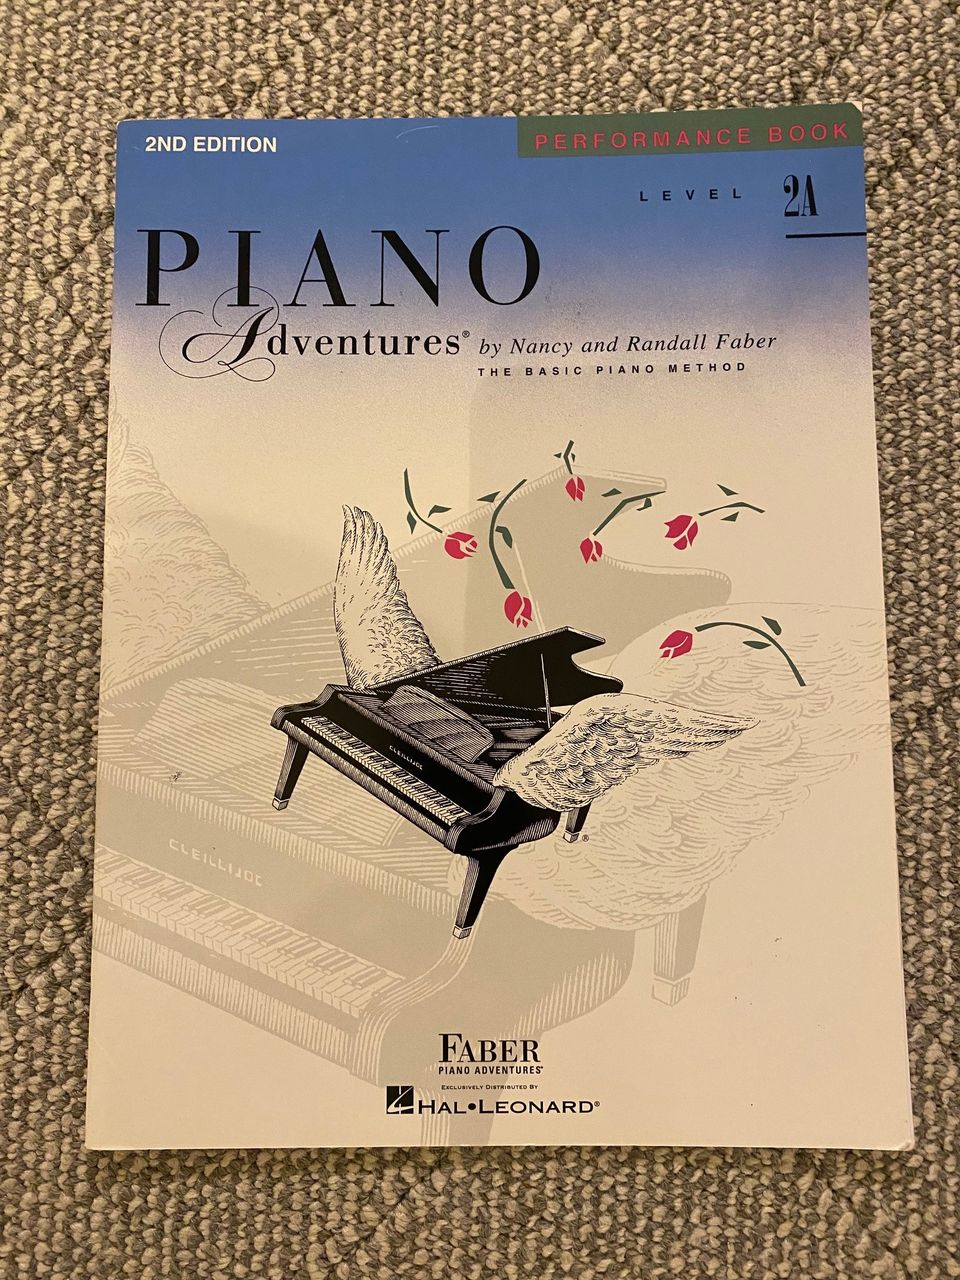 Piano Adventures. Faber.Taso 2A. Perfomance Book